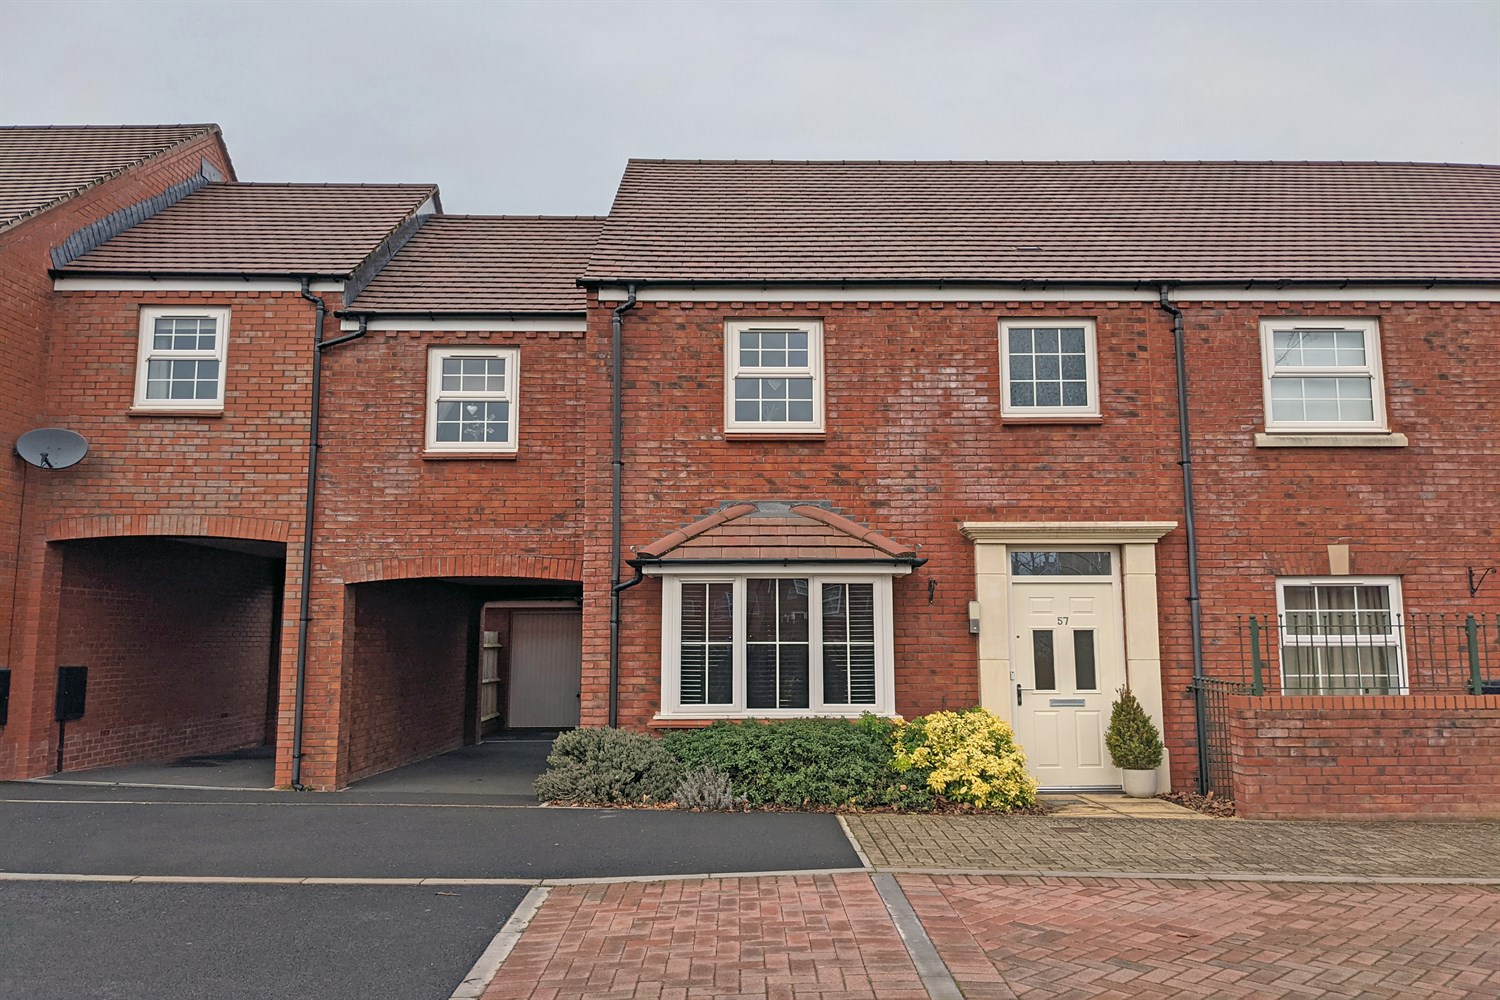 57 Red Norman Rise, Holmer, Hereford